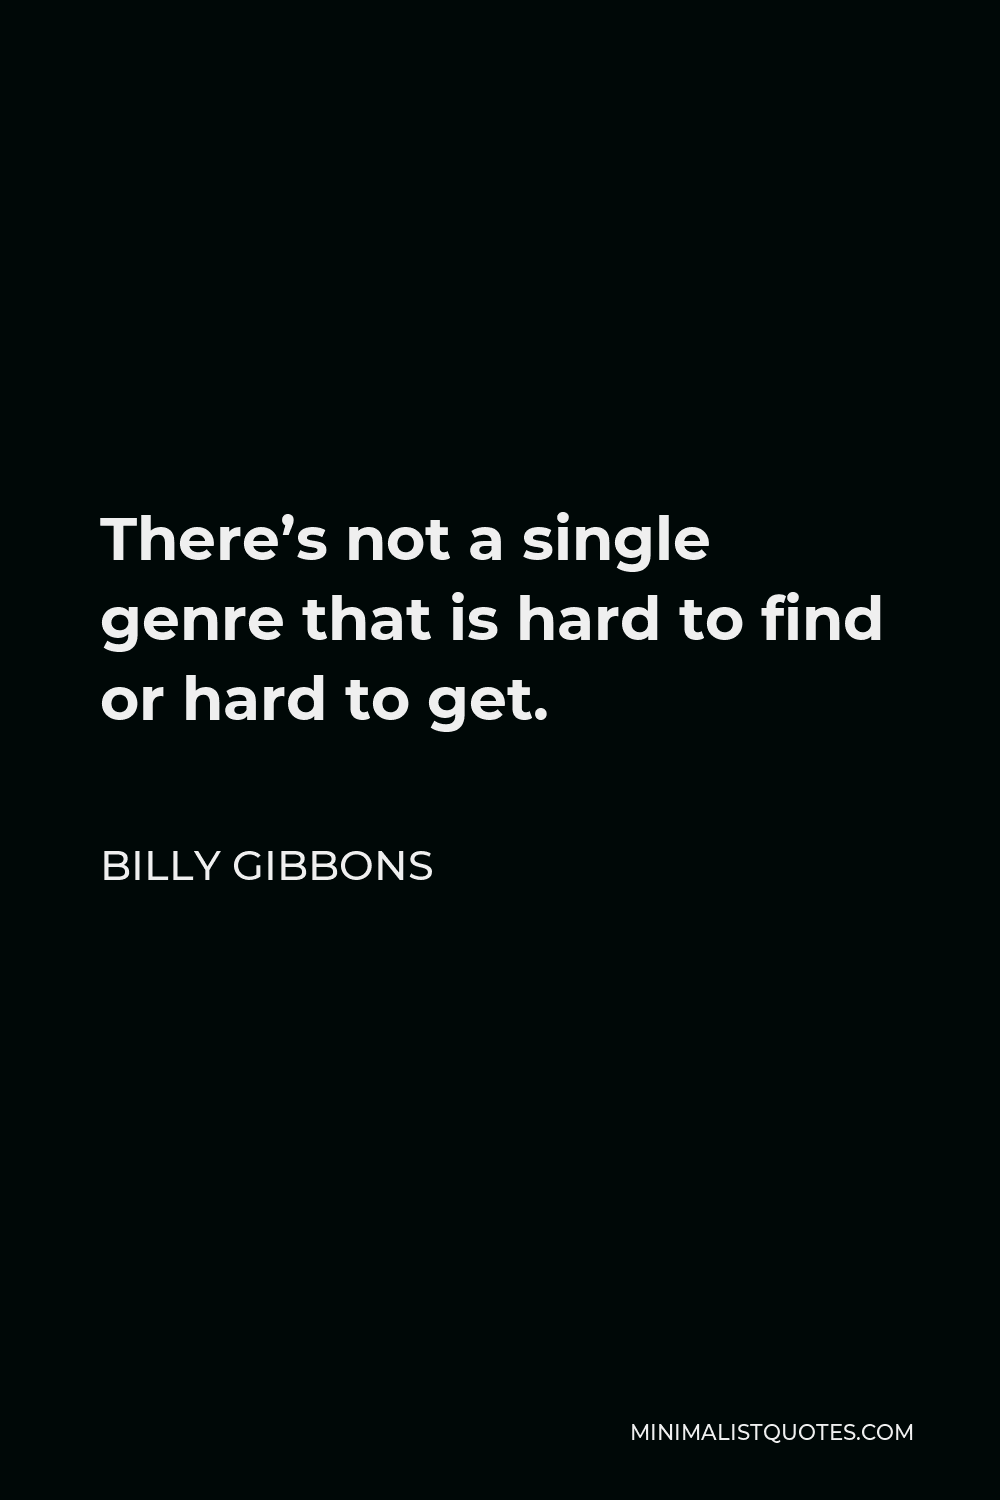 Billy Gibbons Quote - There’s not a single genre that is hard to find or hard to get.